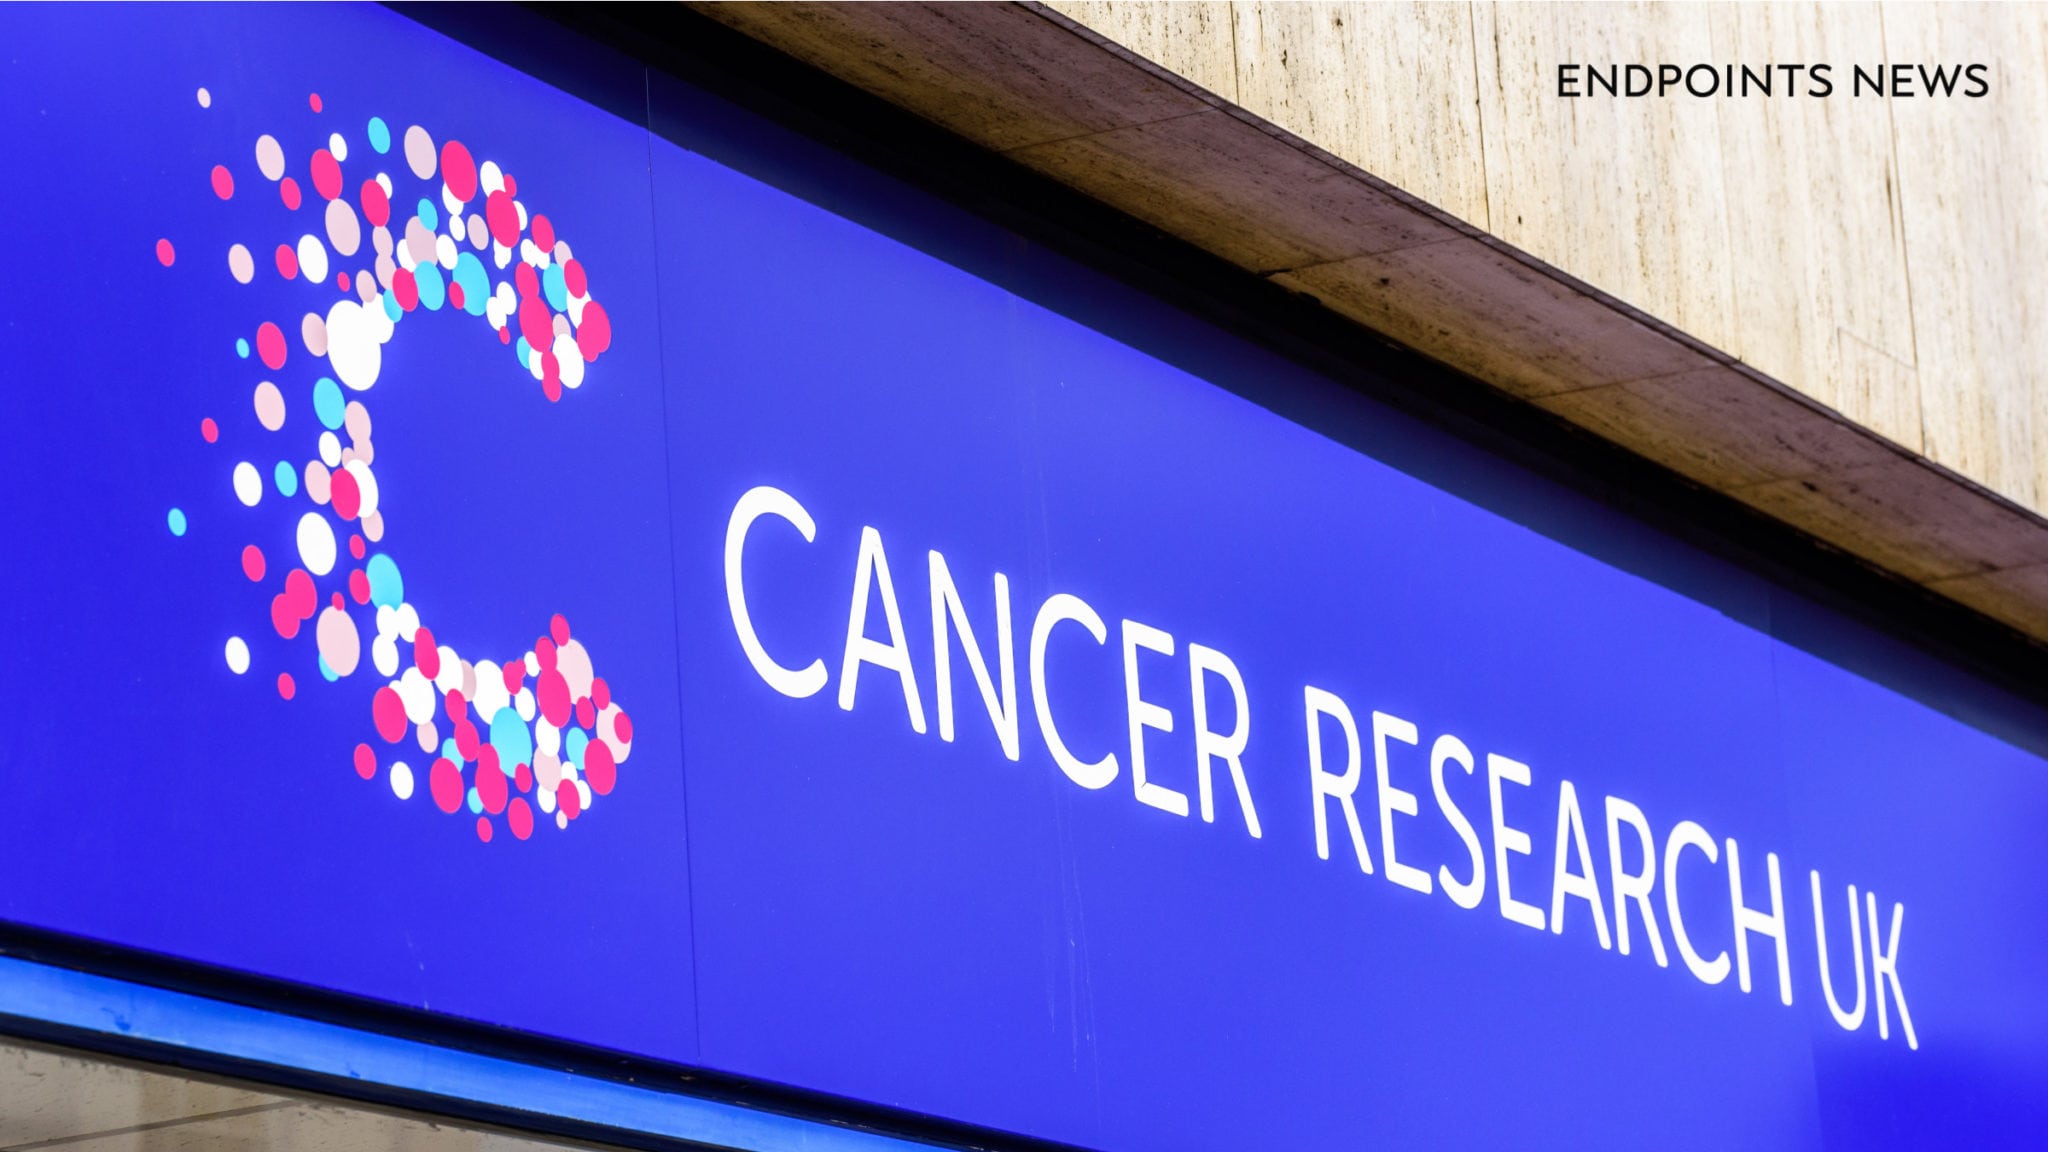 new cancer research companies